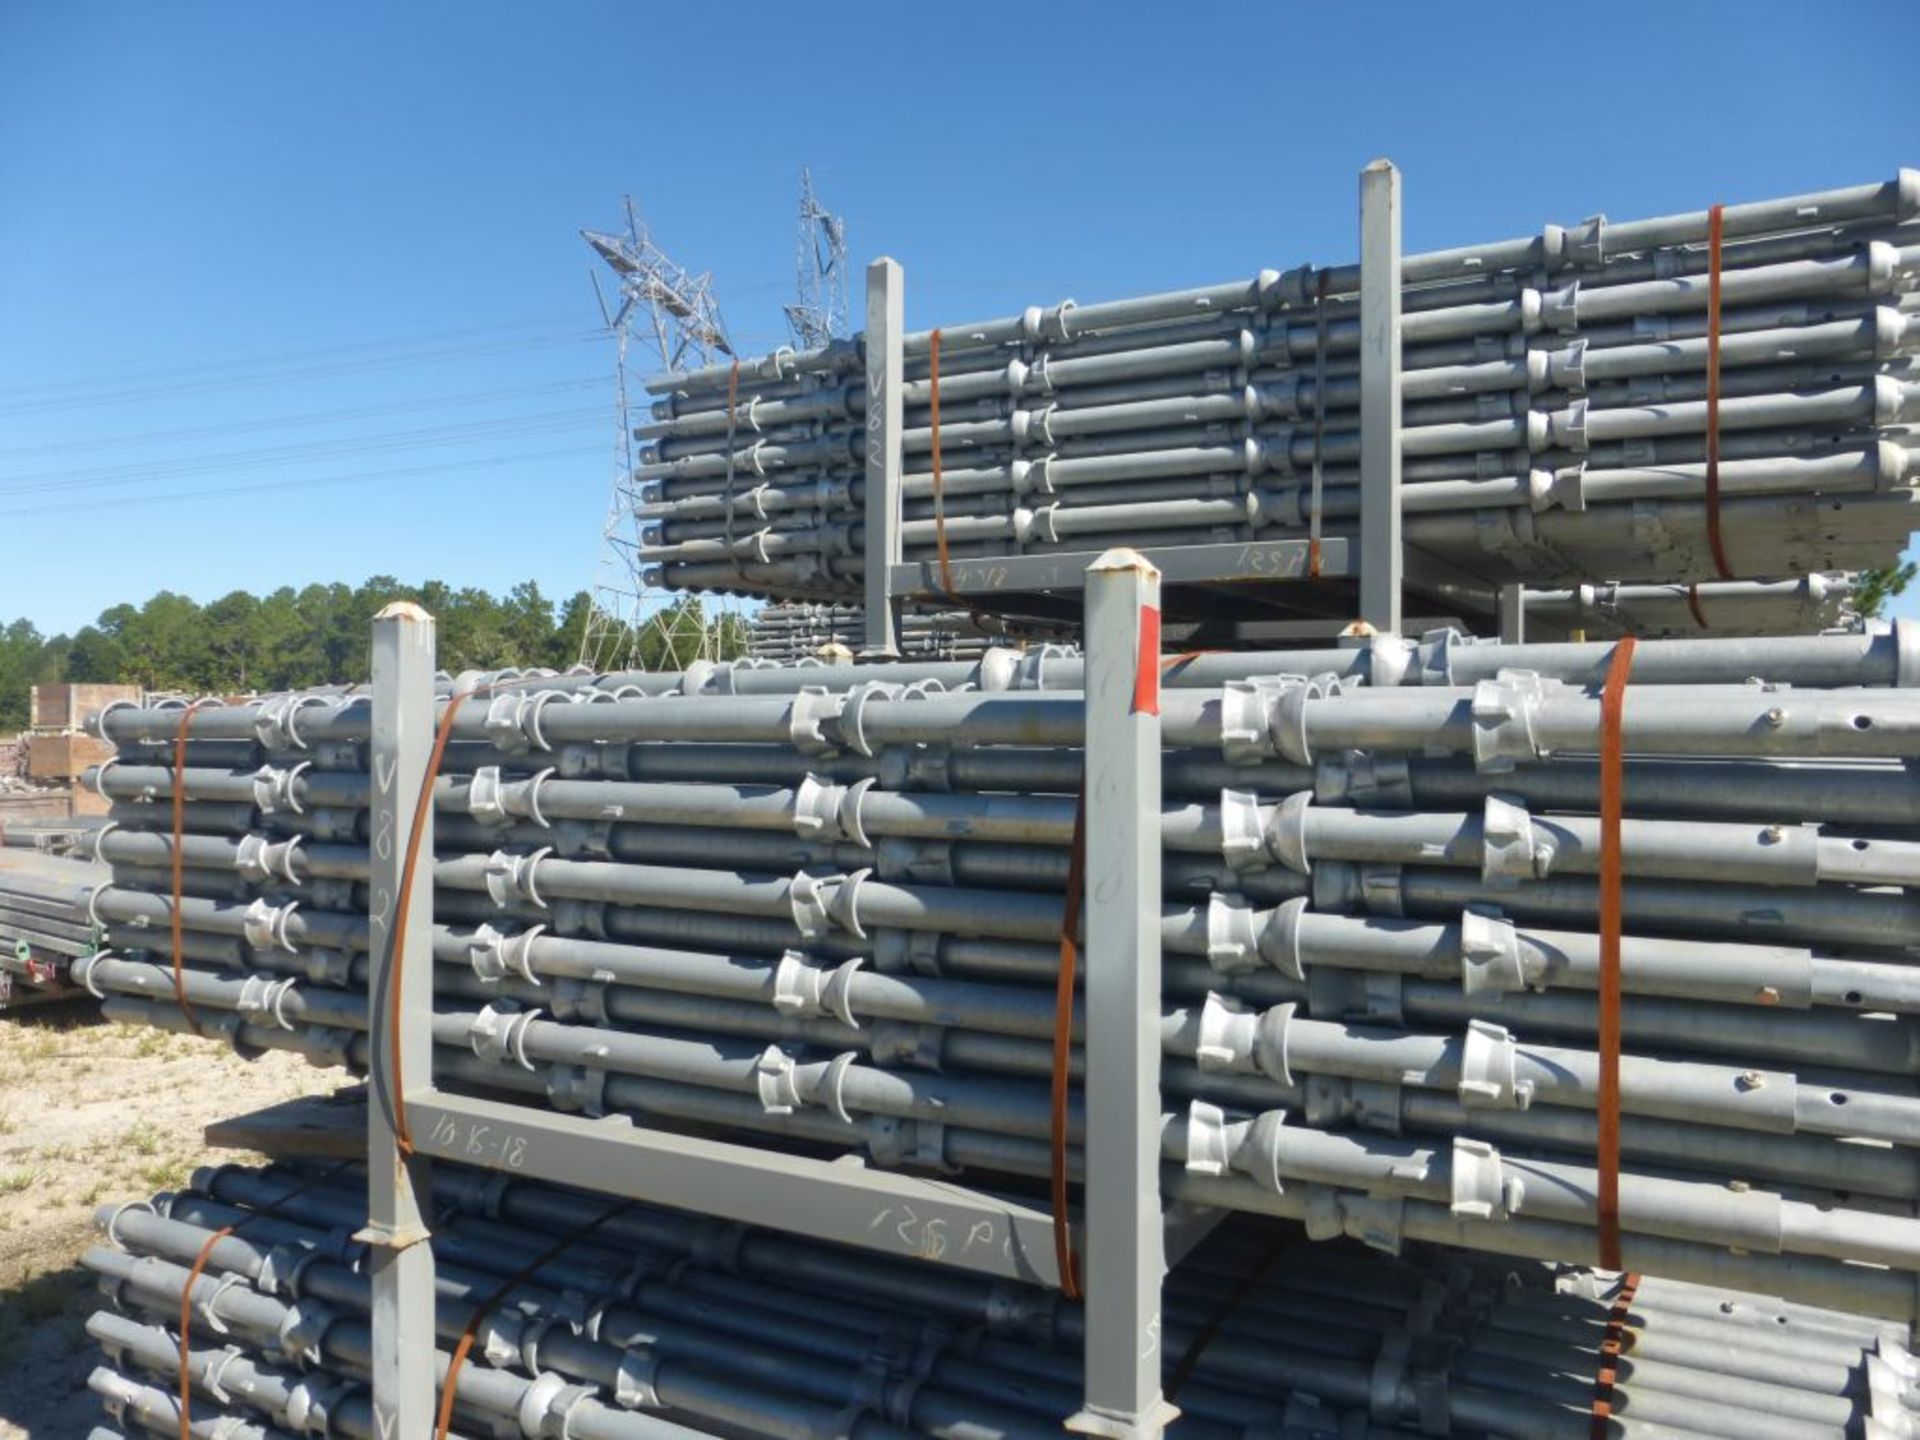 Lot of (250) 8' 2" (2.5M) Vertical 5 Cup; Type: CLV82 - (2) Racks Per Lot - Approximate Weight:7,850 - Image 3 of 10